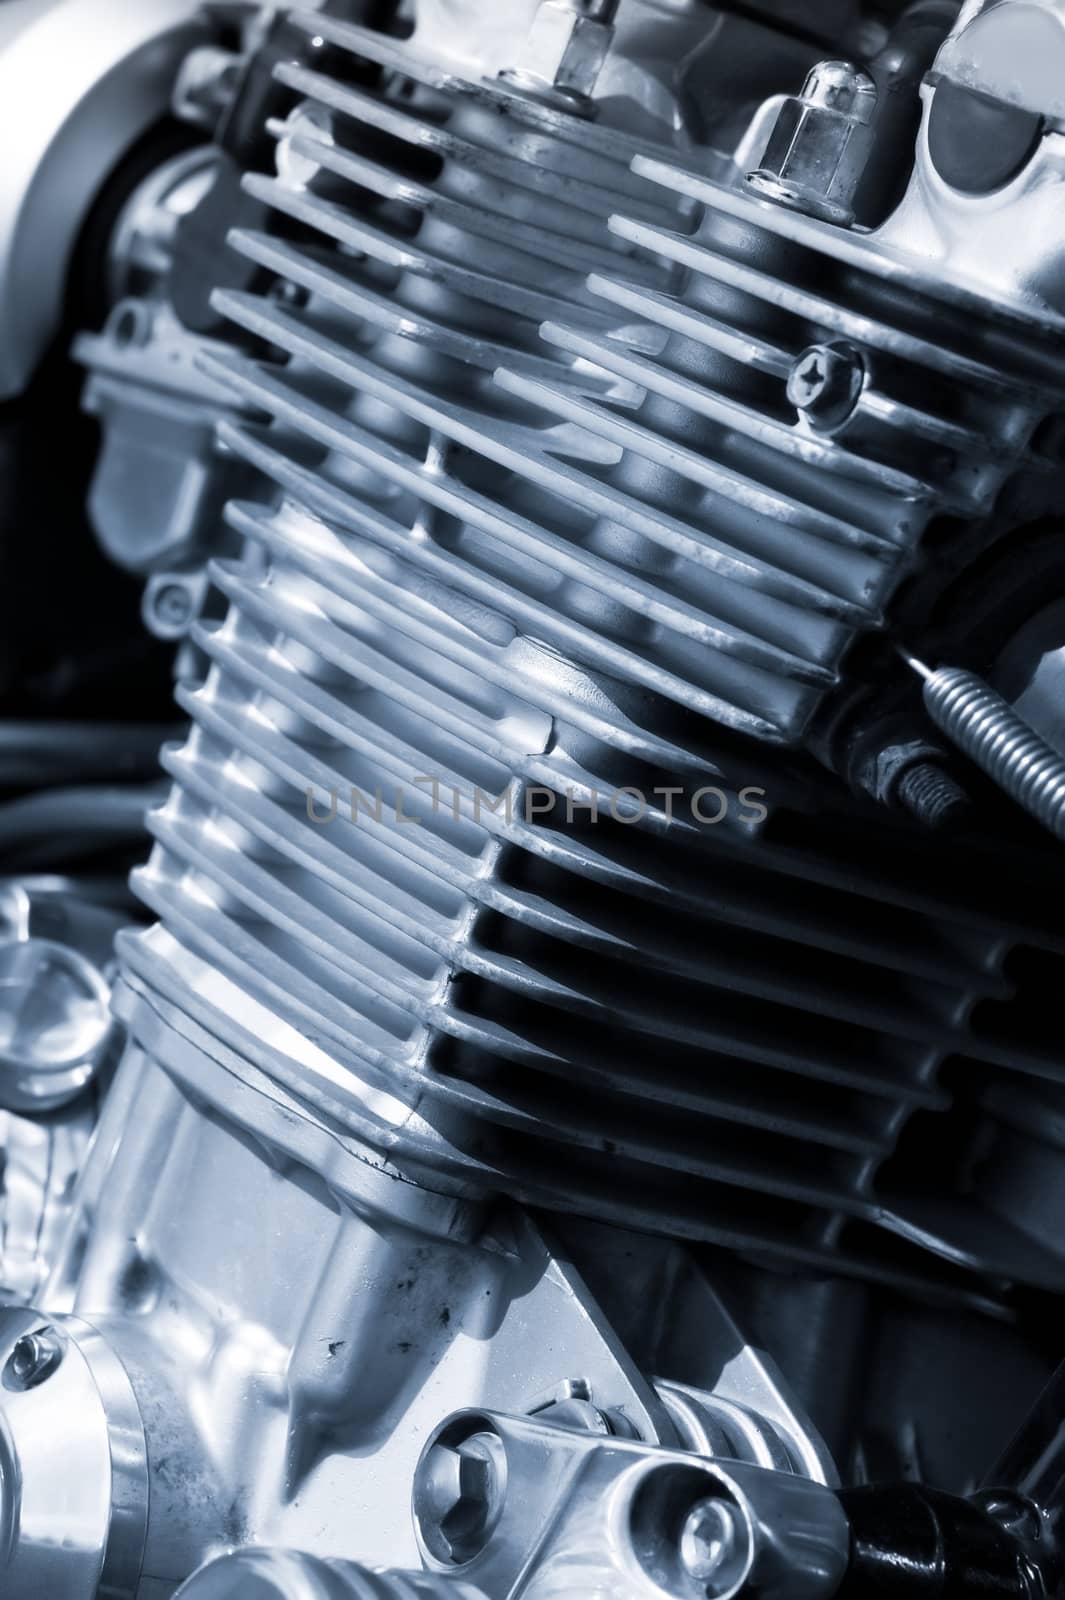 air cooled motorcycle engine detail with a blue tint